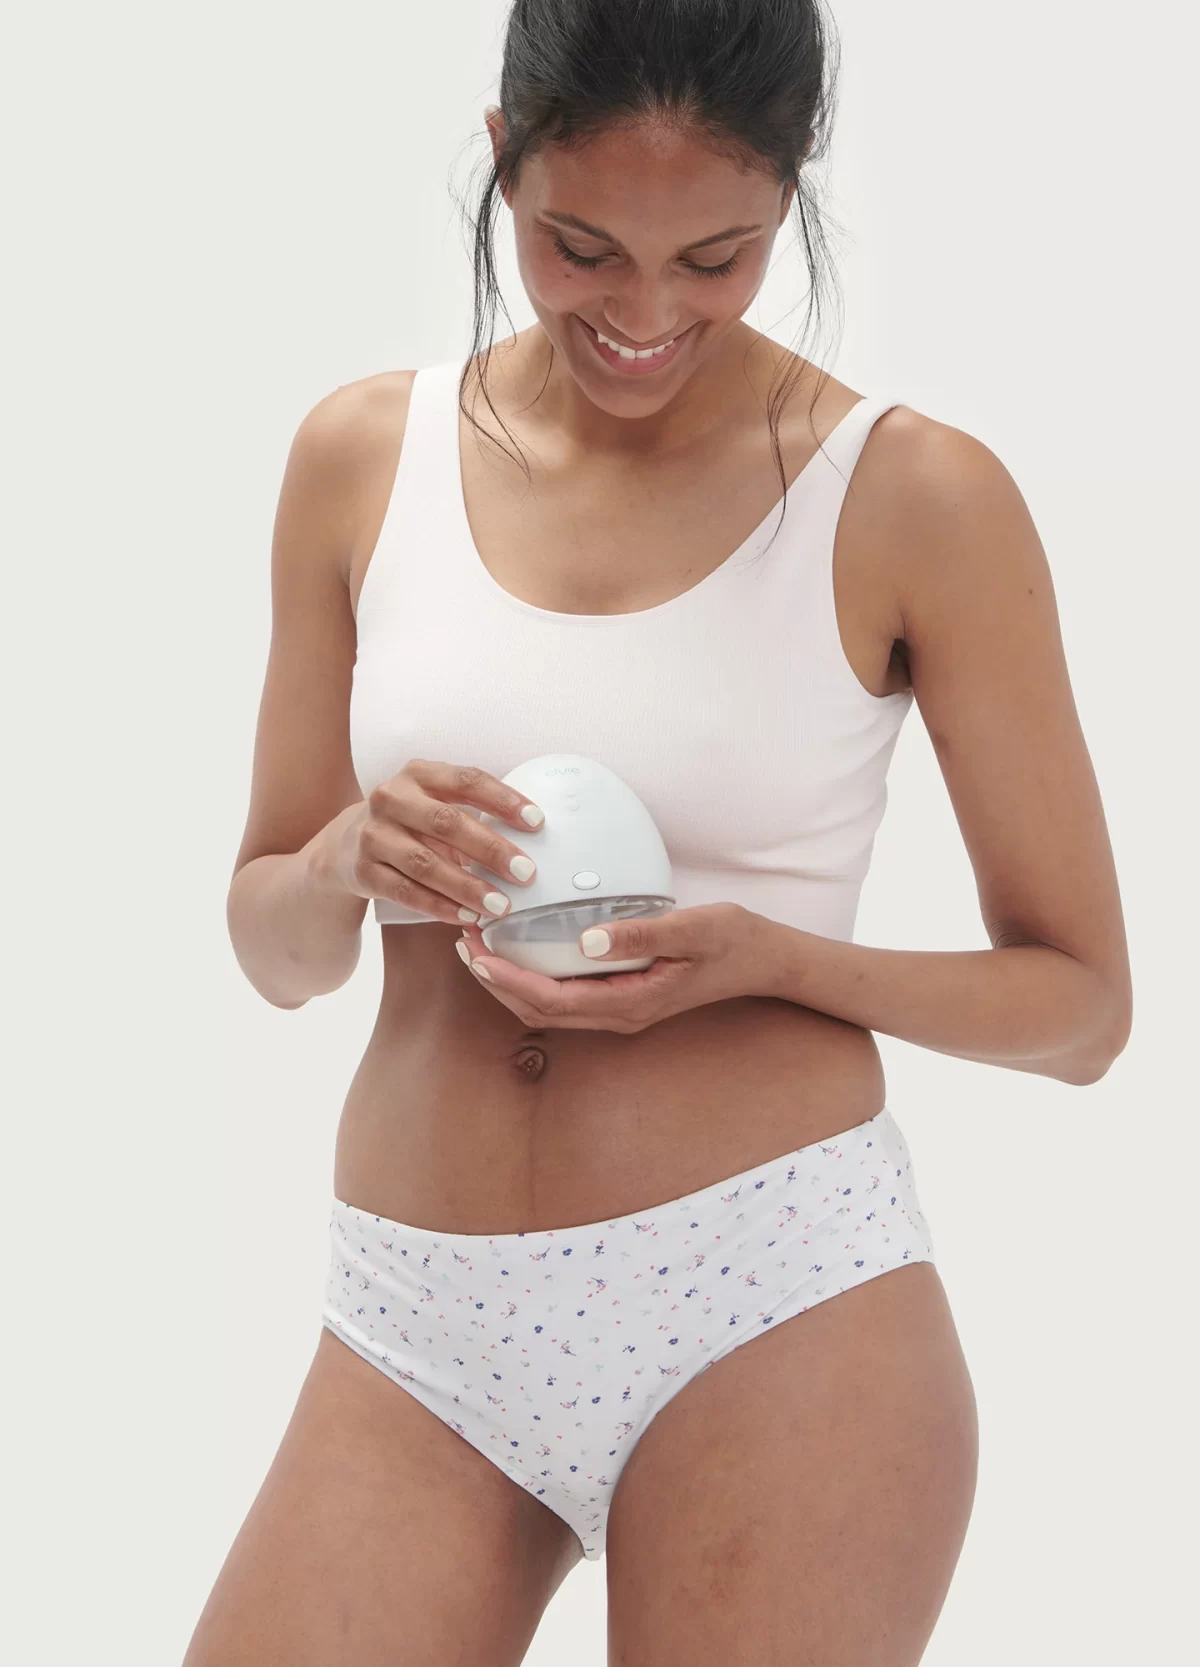 25 Of The Best Underwear Brands To Keep You Comfortable All Day Long